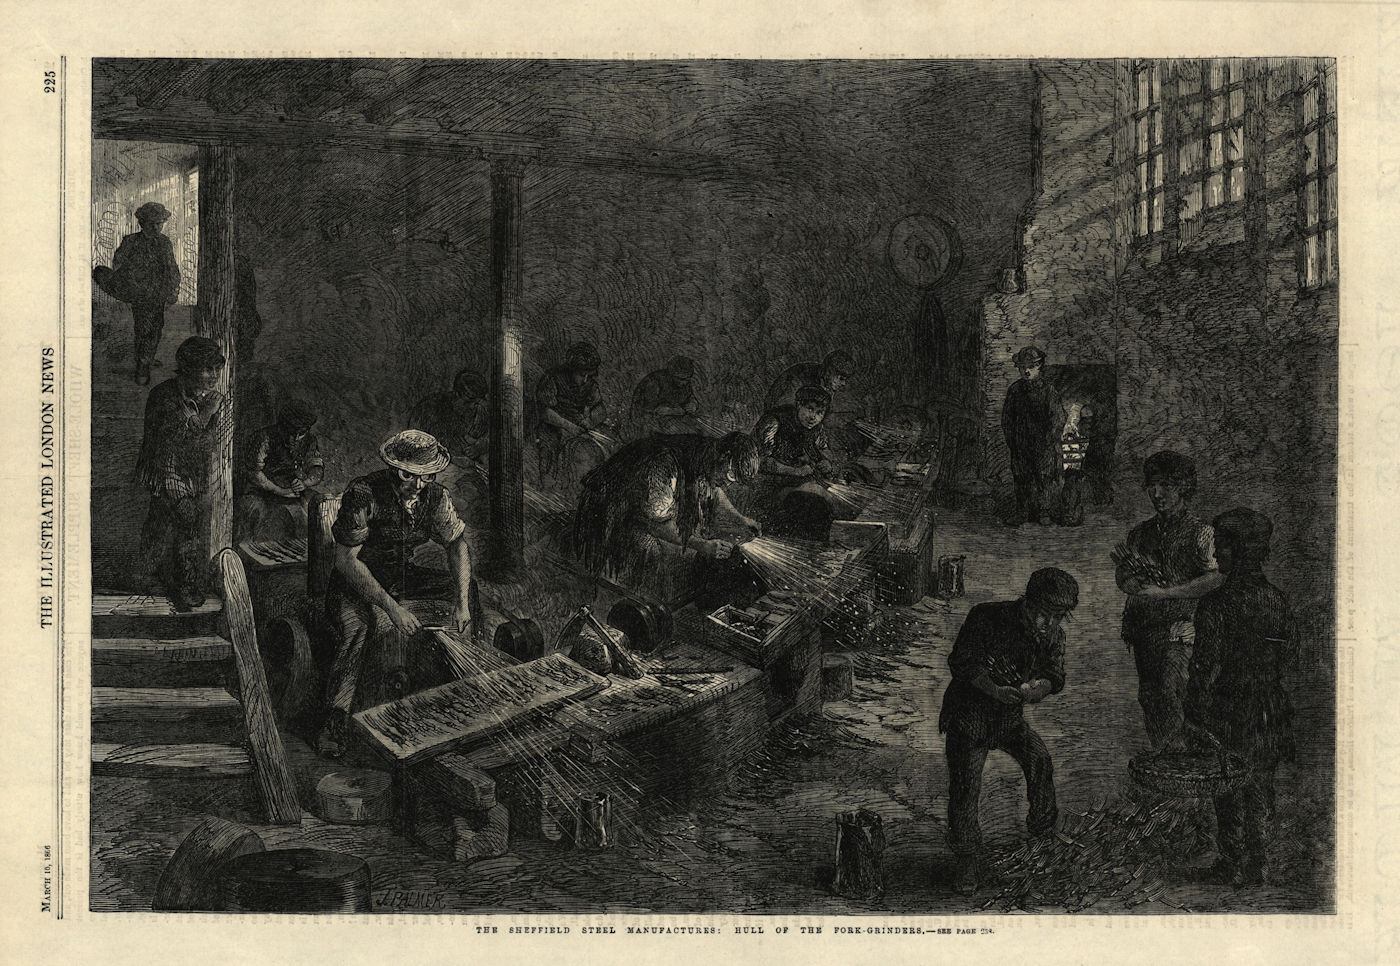 The Sheffield steel manufactures: Hull of the fork-grinders. Manufacturing 1866